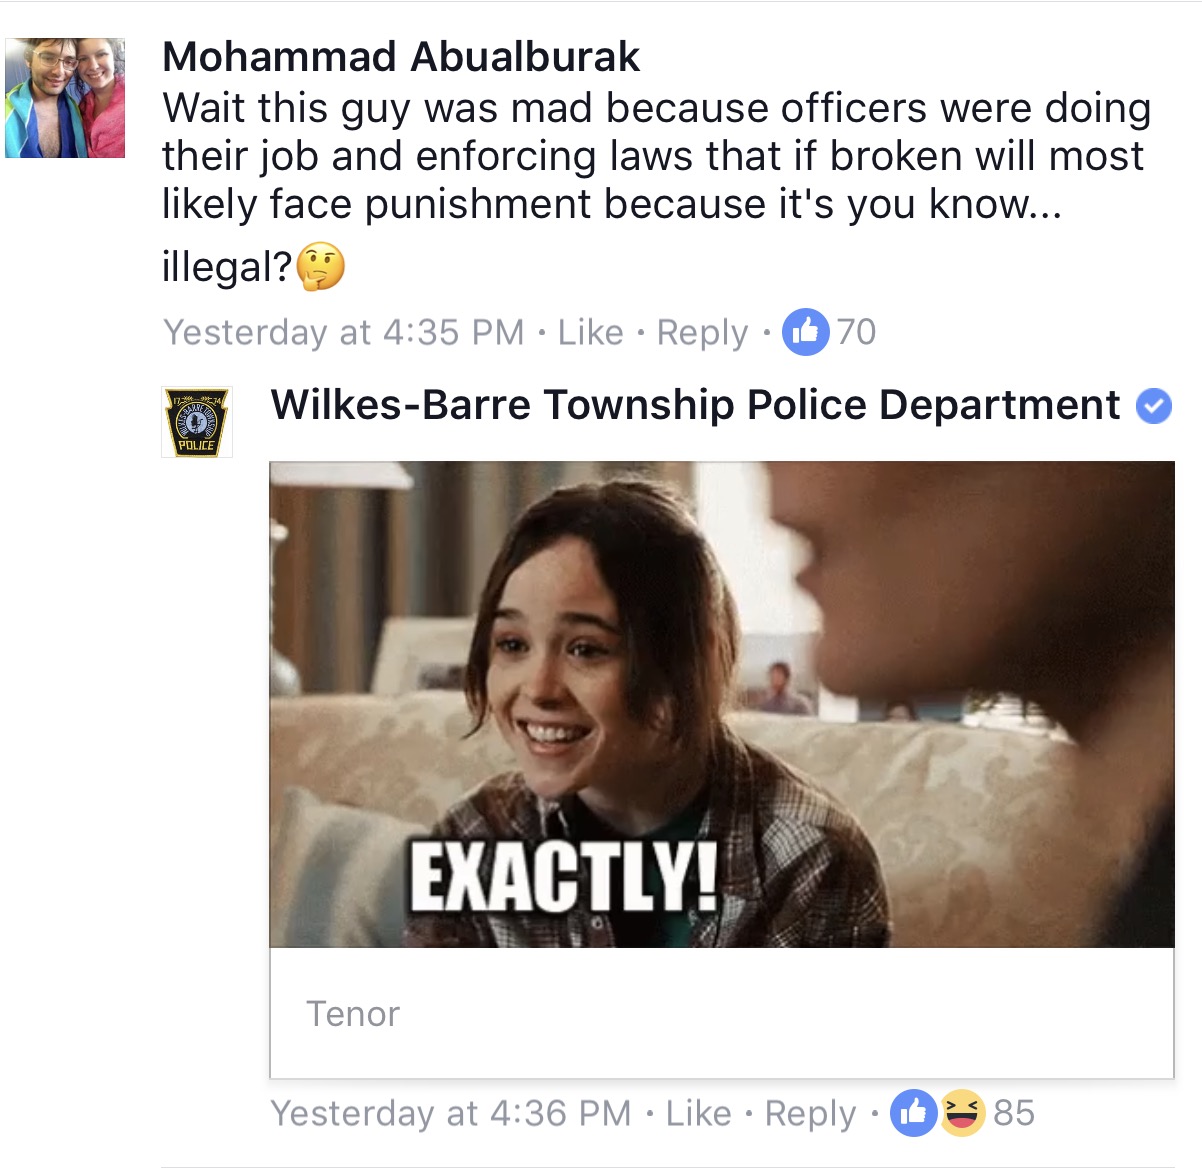 photo caption - Mohammad Abualburak Wait this guy was mad because officers were doing their job and enforcing laws that if broken will most ly face punishment because it's you know... illegal? Yesterday at 70 WilkesBarre Township Police Department Police 